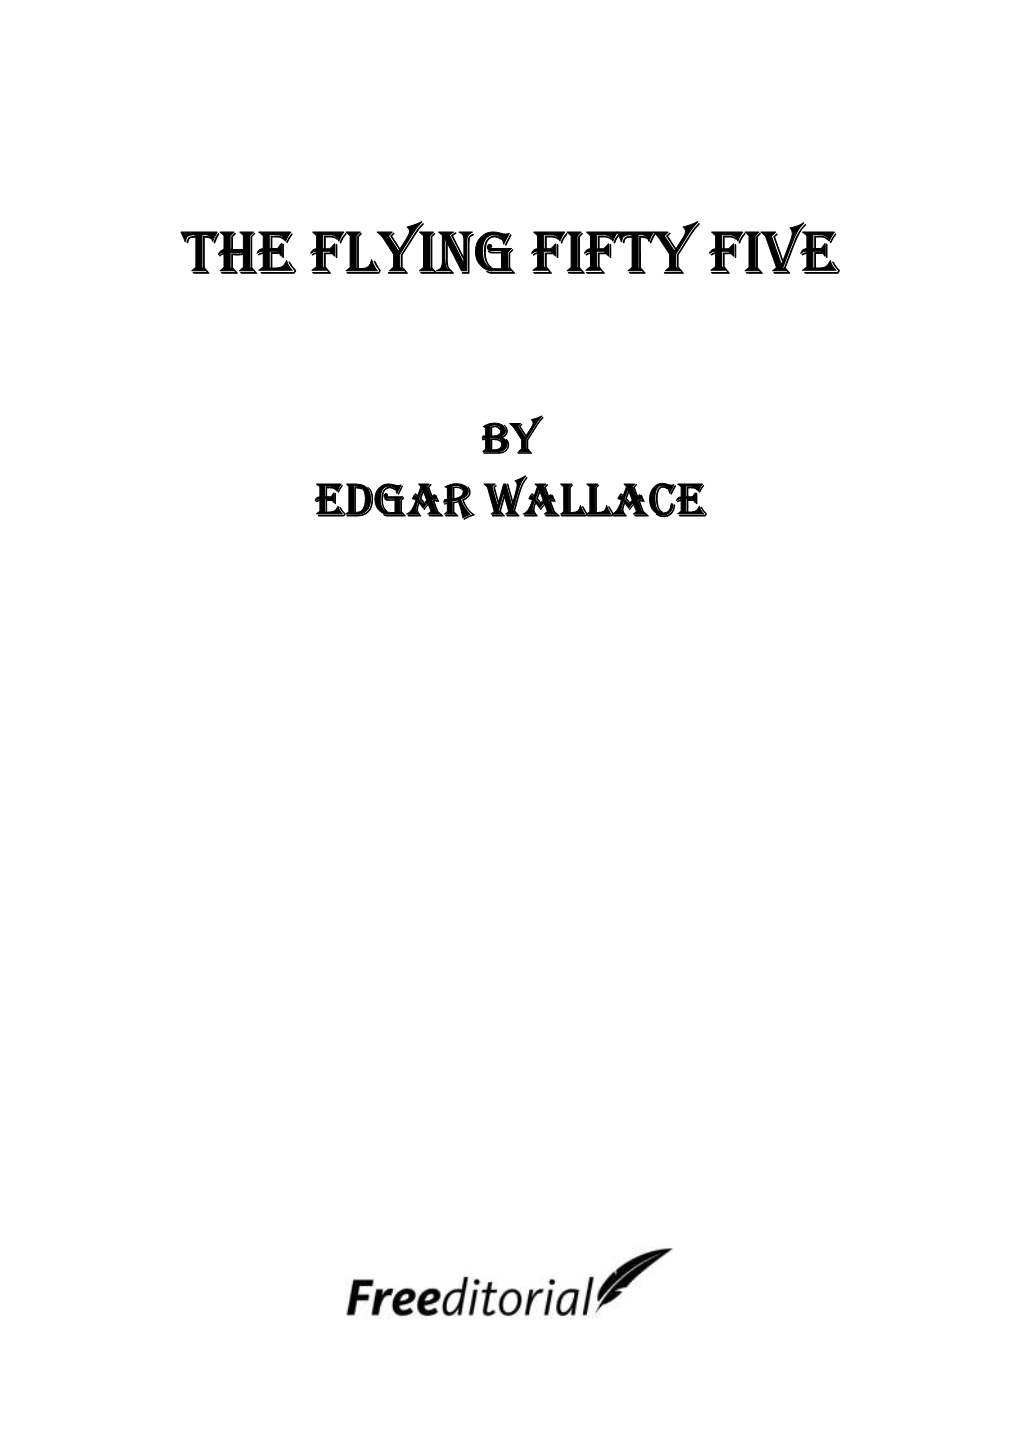 The Flying Fifty Five